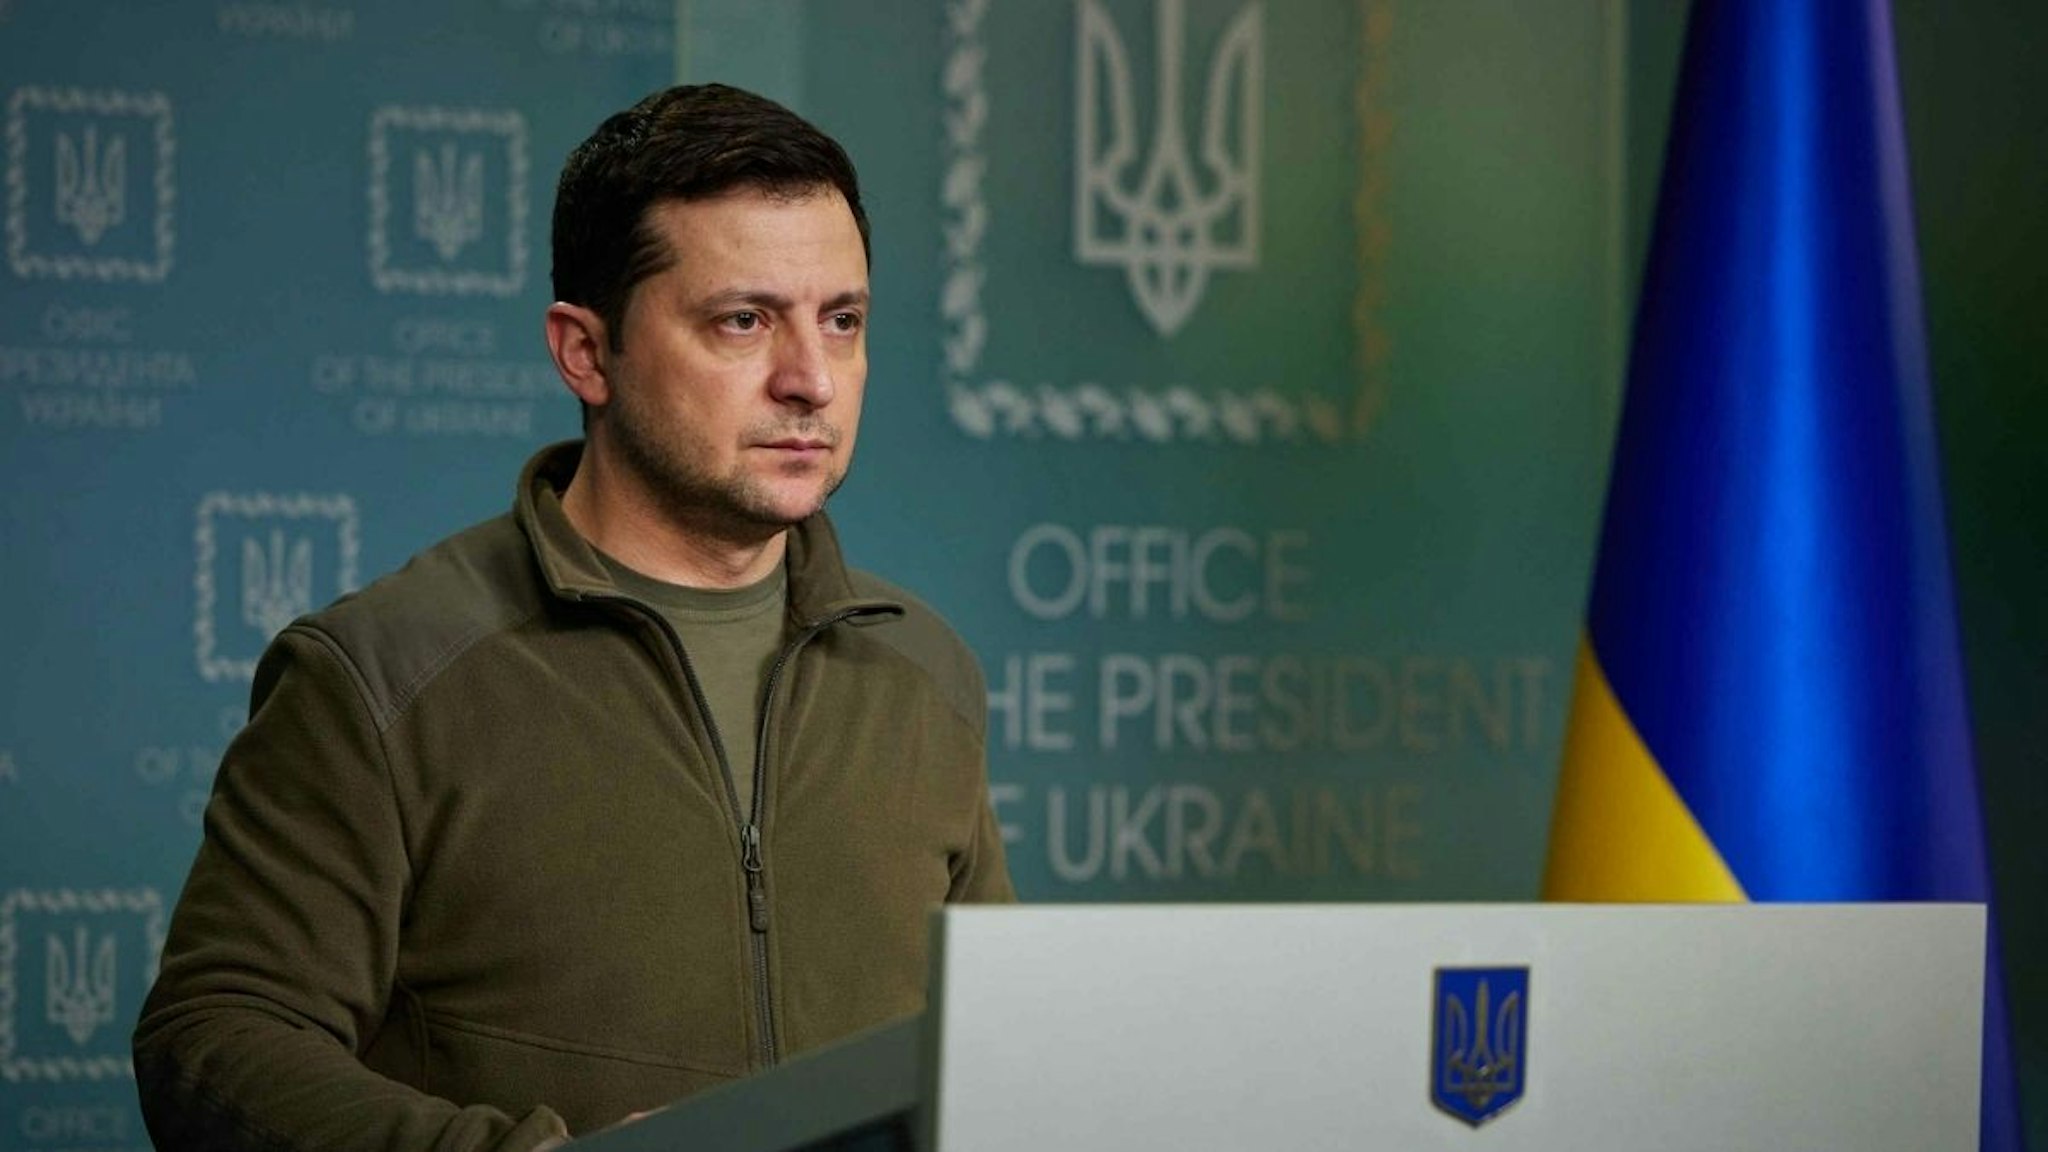 Ukraine's President Volodymyr Zelenskyy holds a press conference on Russia's military operation in Ukraine, on February 25, 2022 in Kyiv.